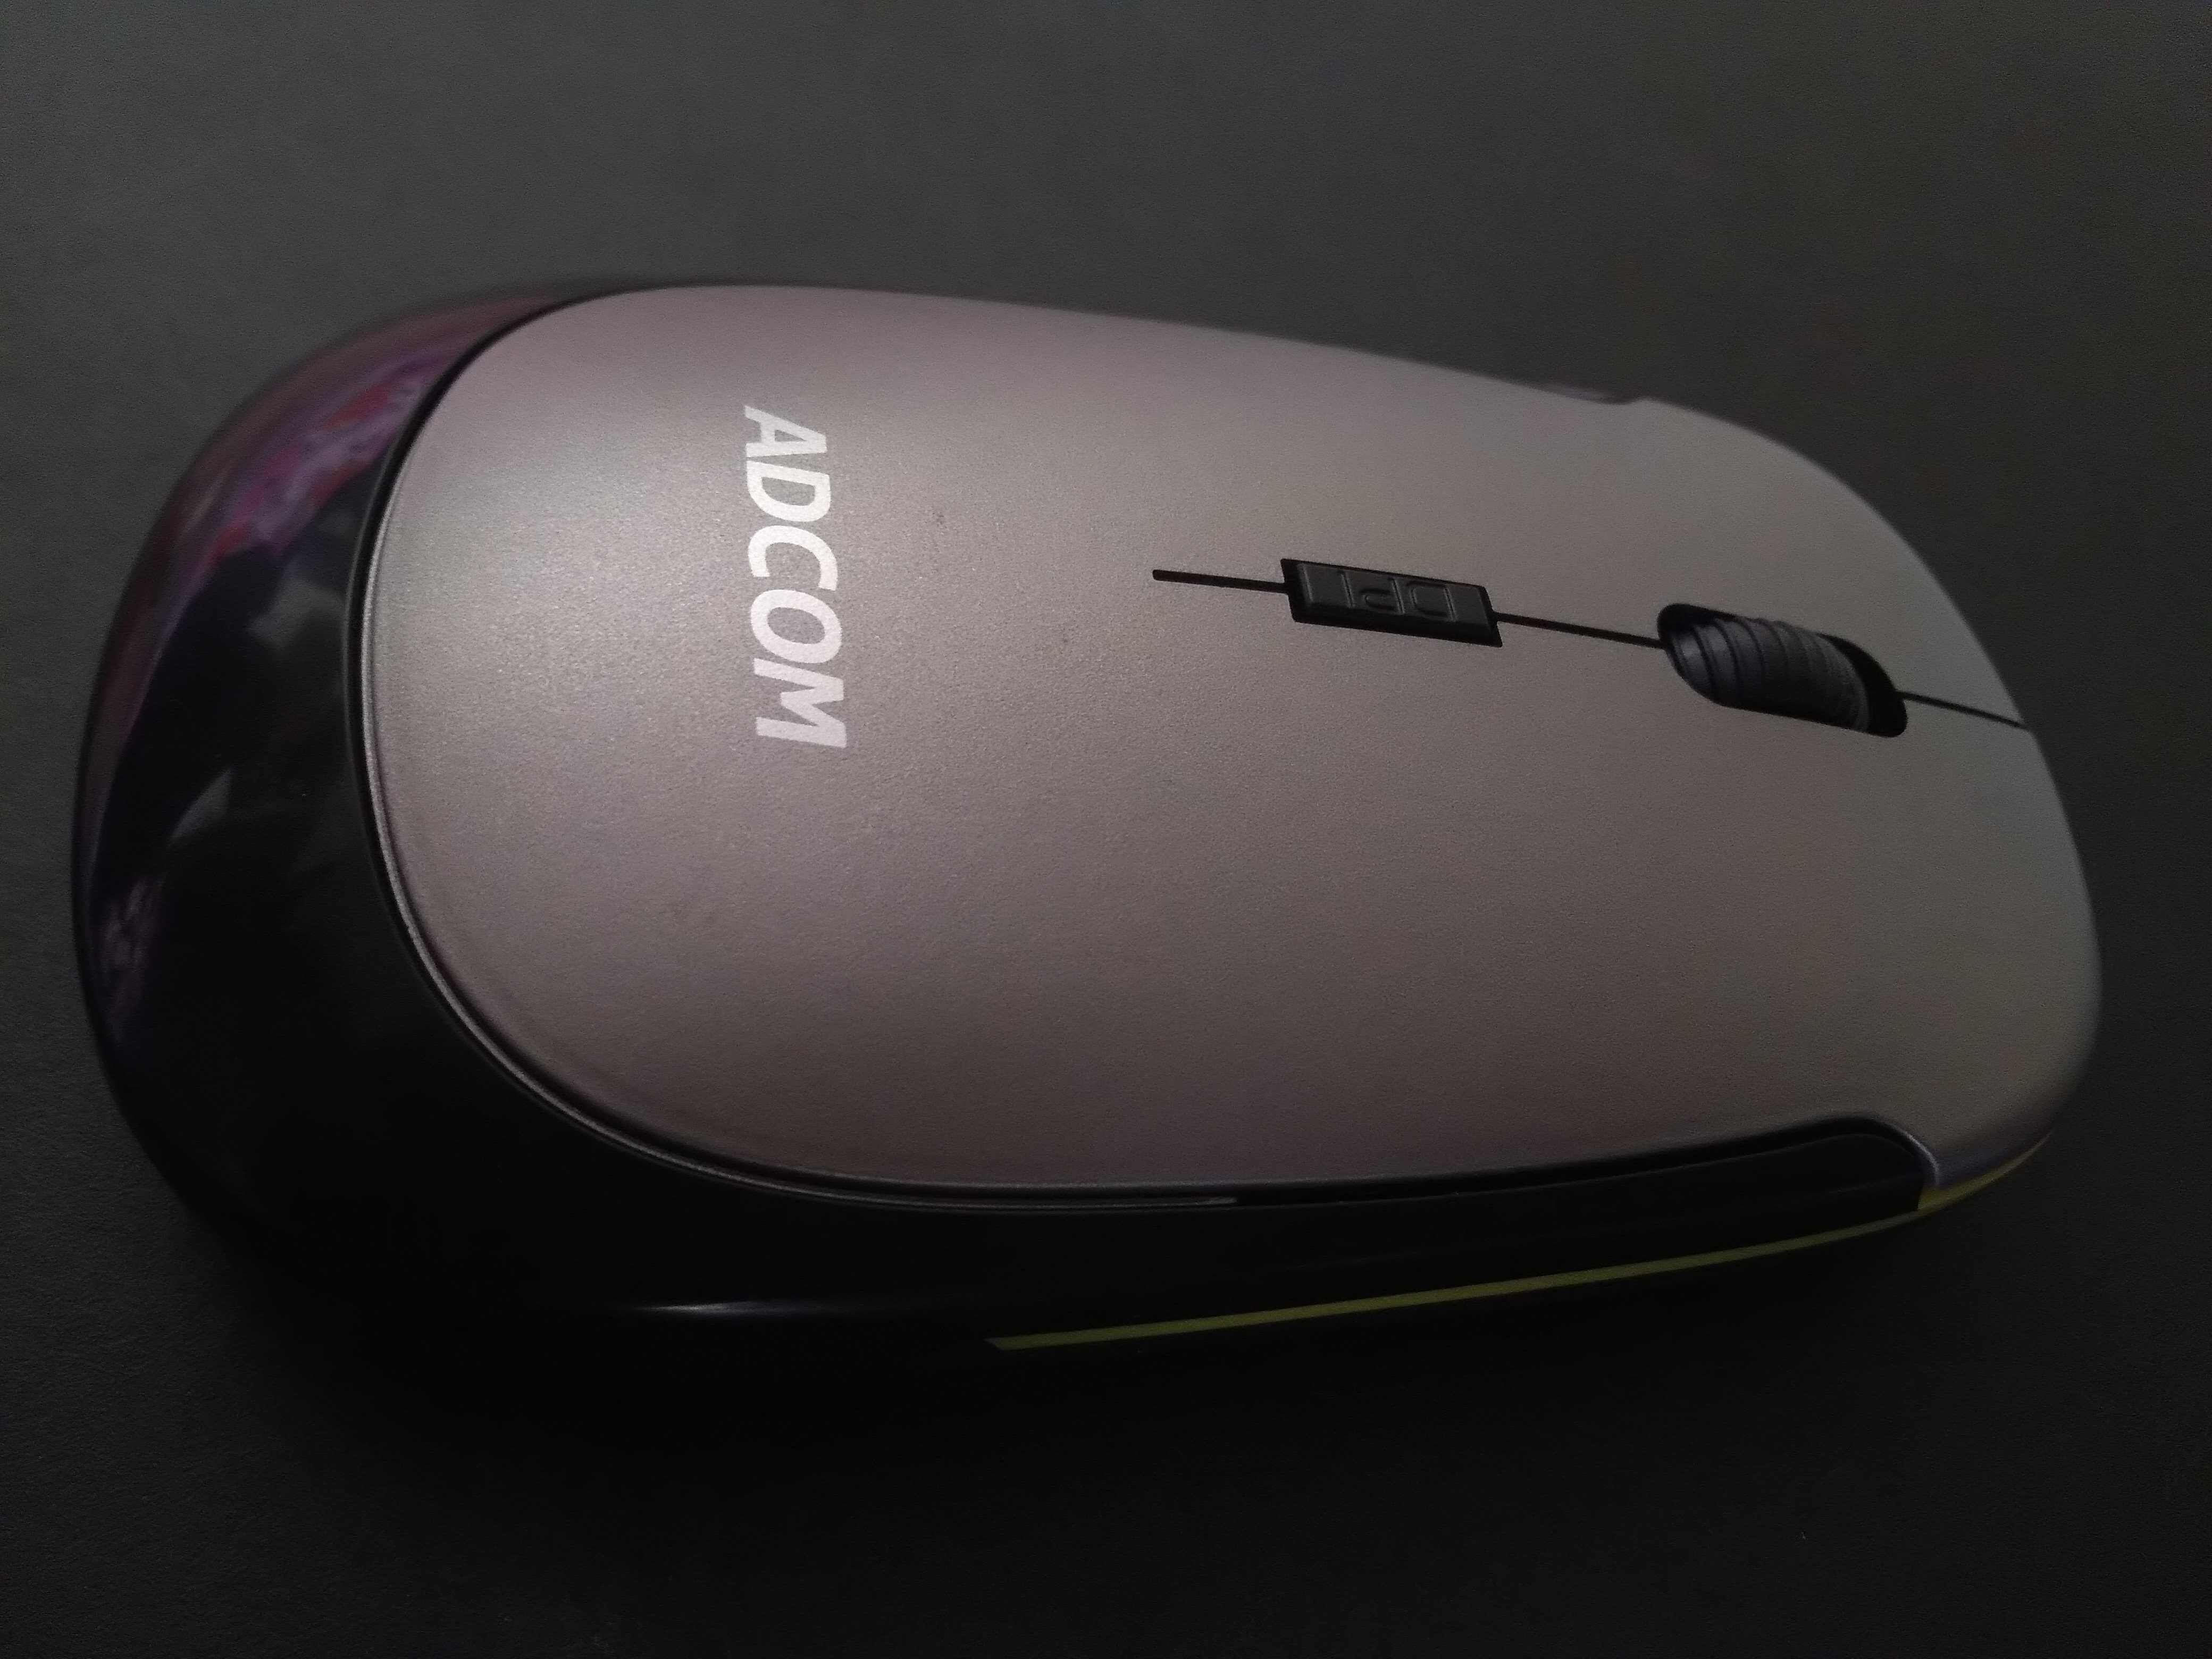 best wireless mouse for csgo